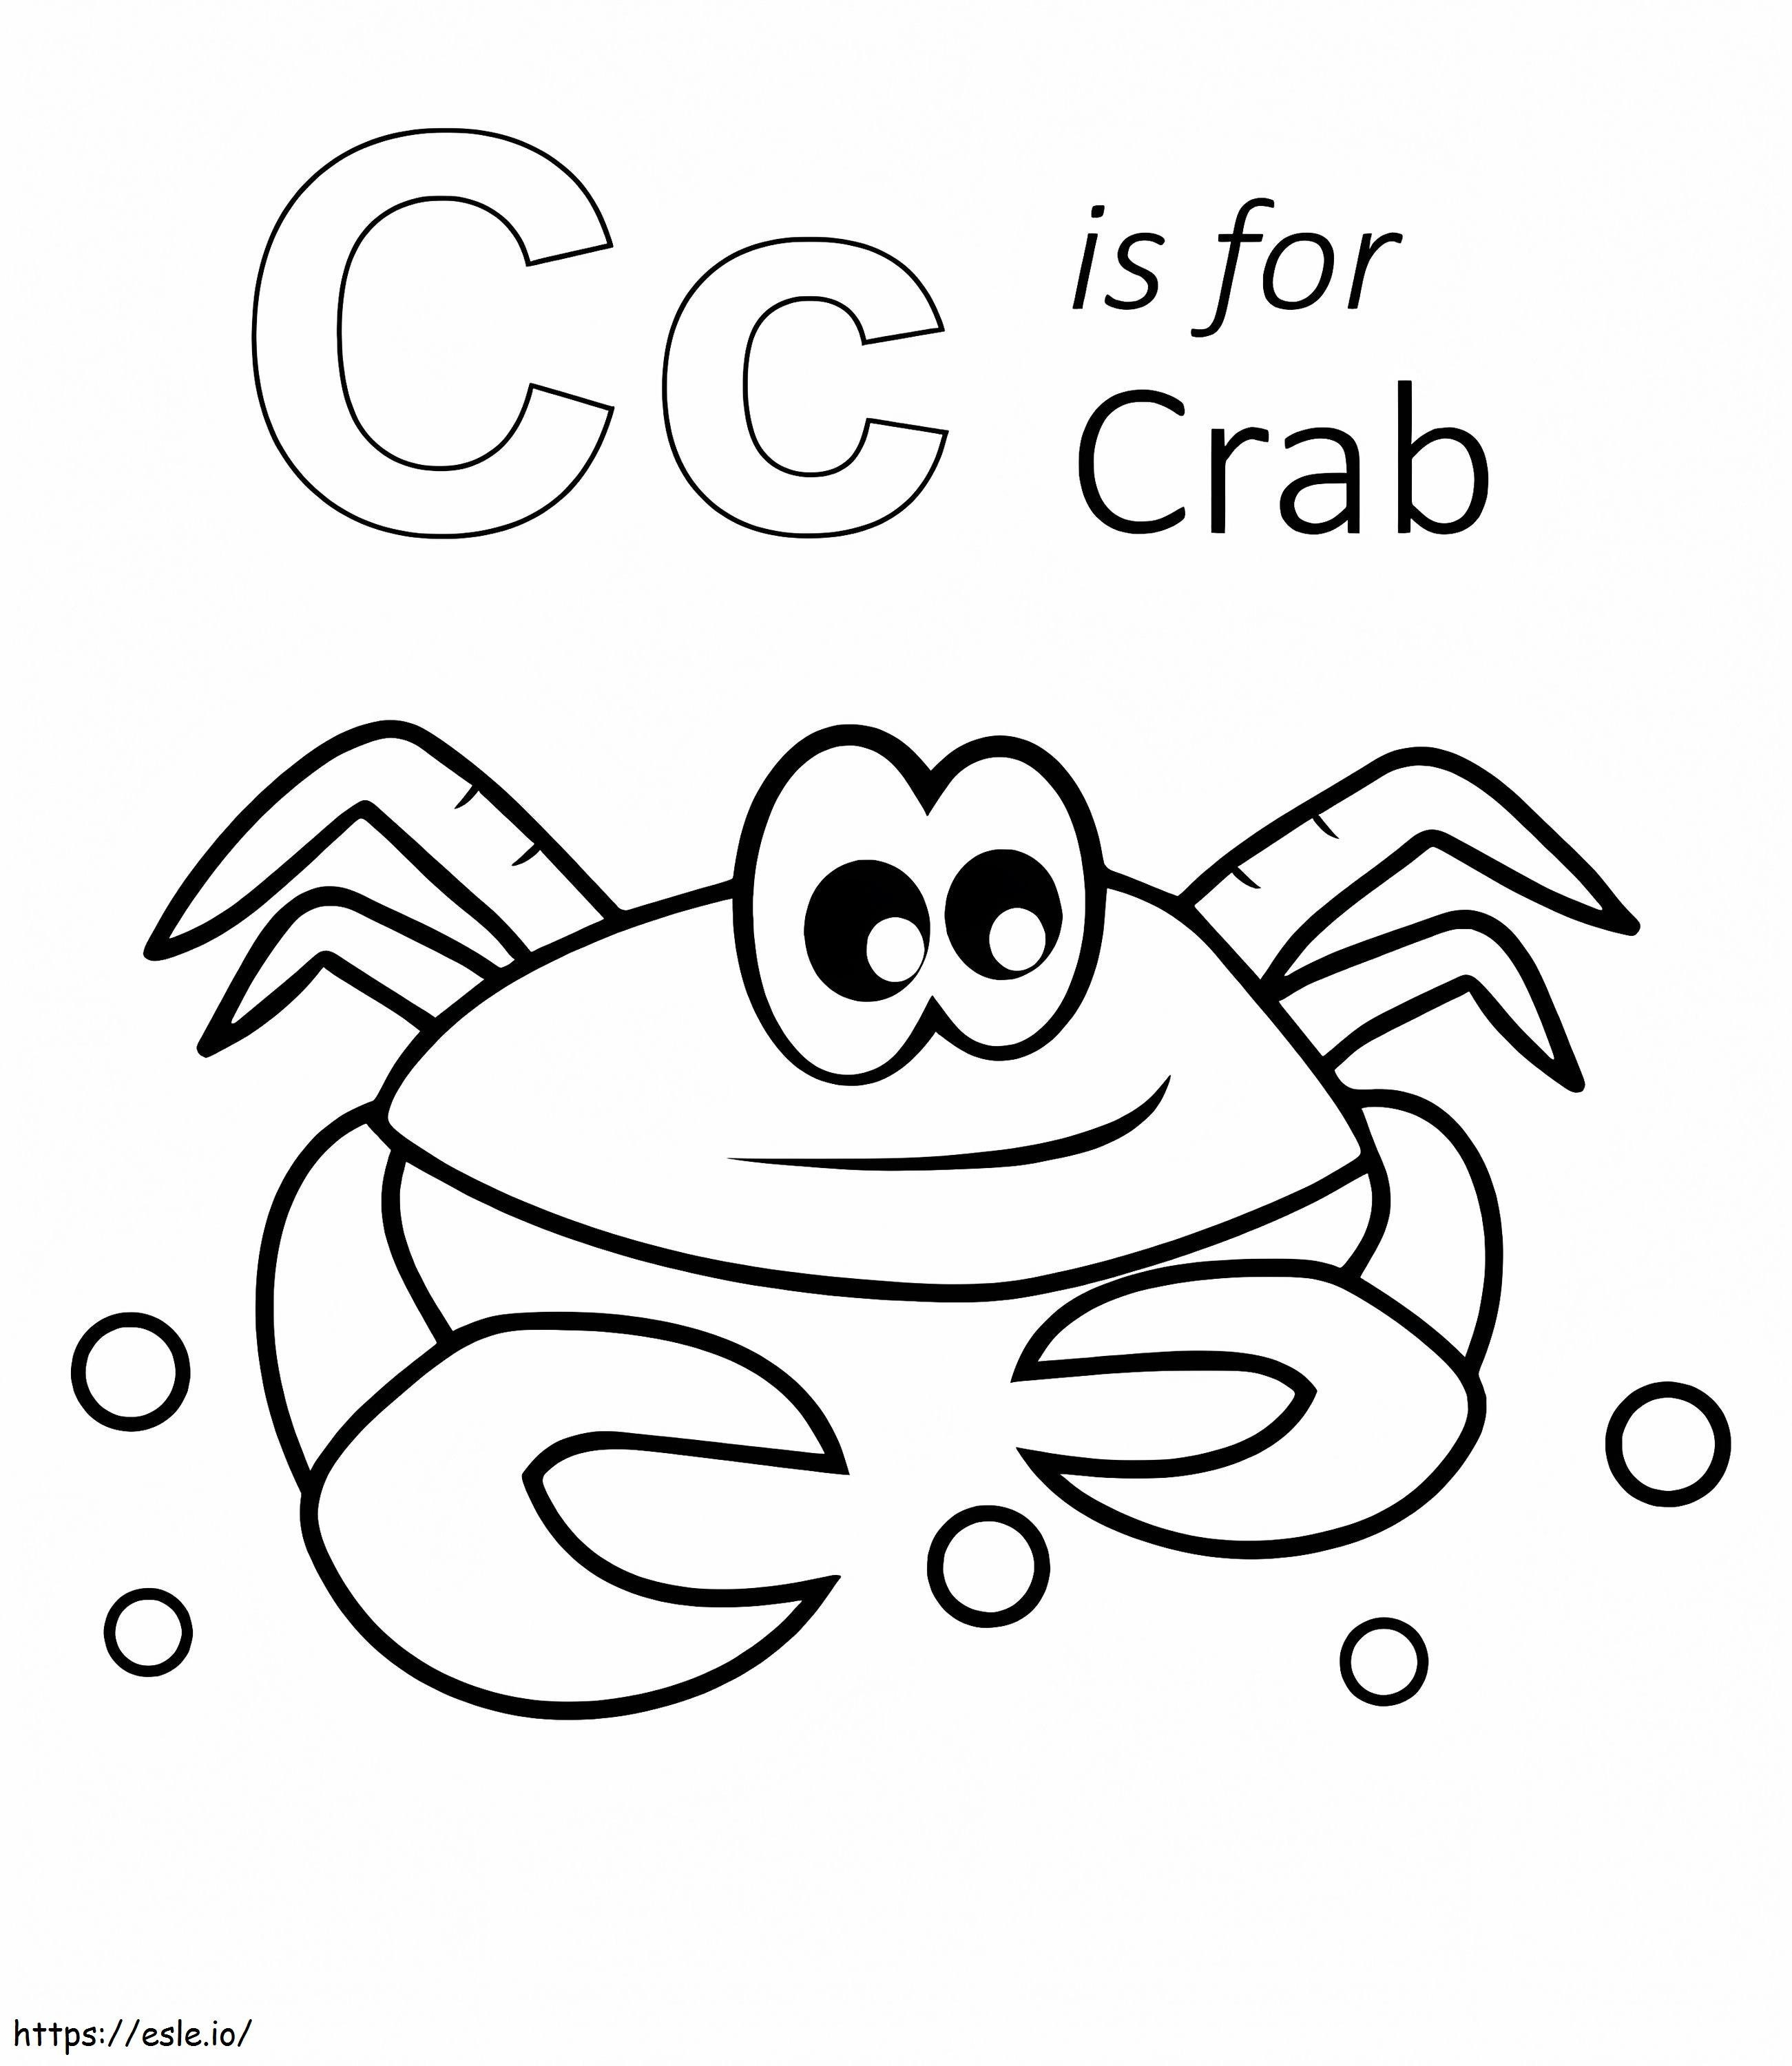 Cute Crab coloring page